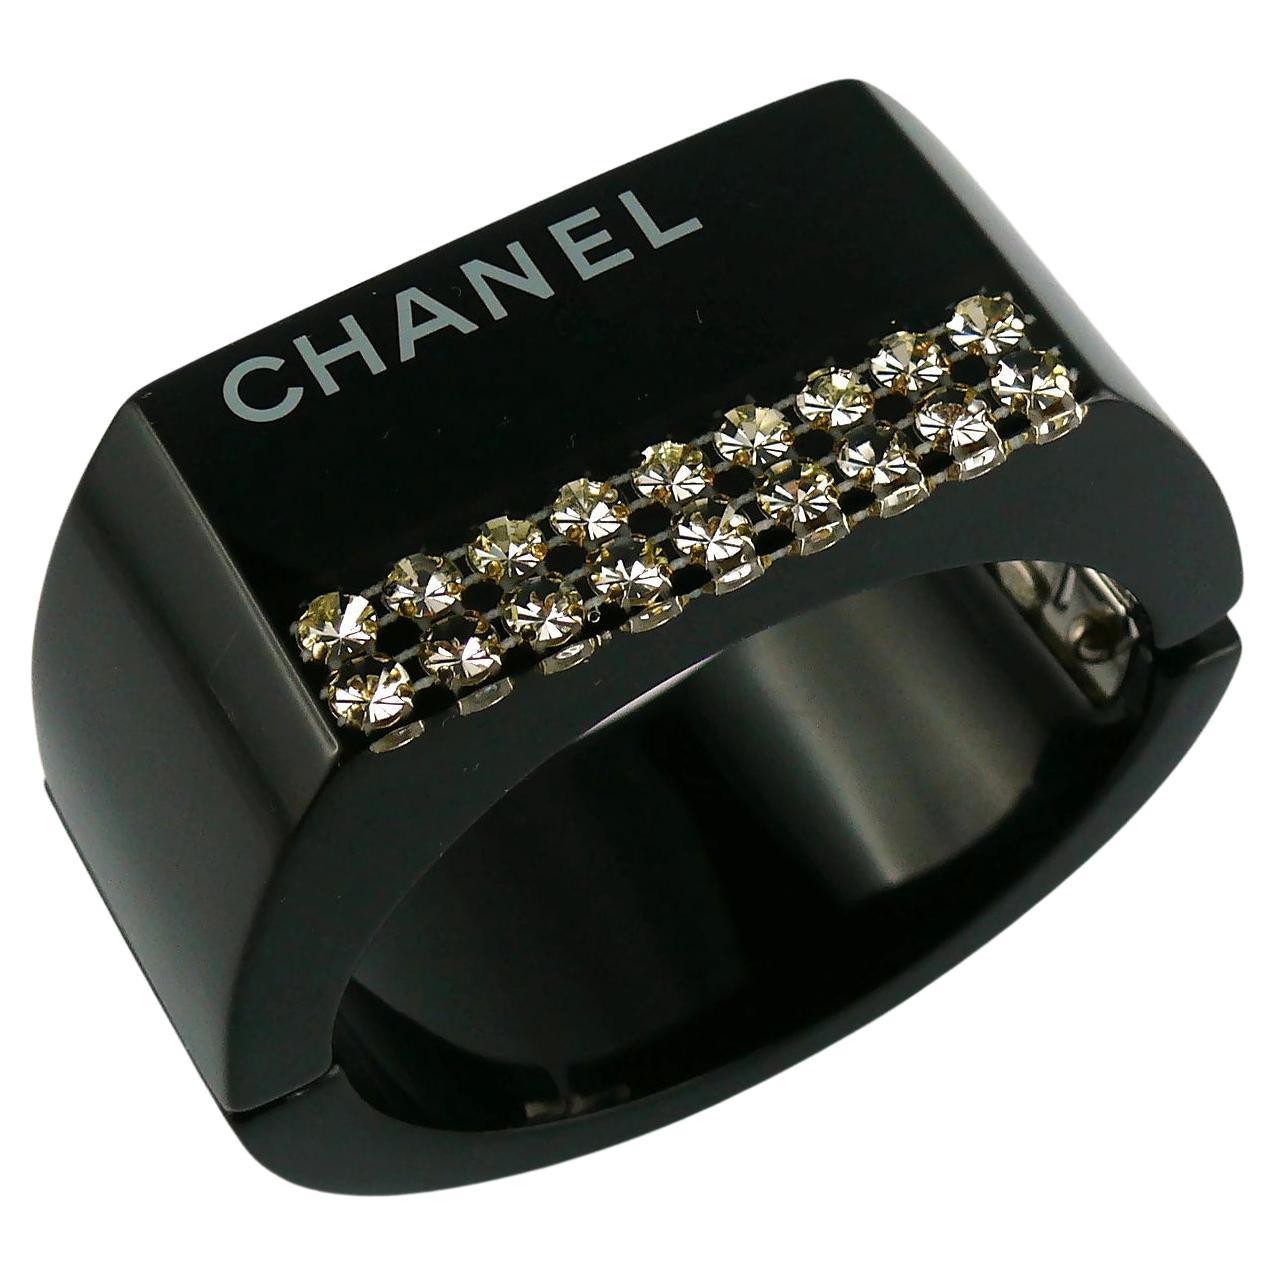 Chanel Black Resin Crystal Inlaid Clamper Cuff Bracelet For Sale